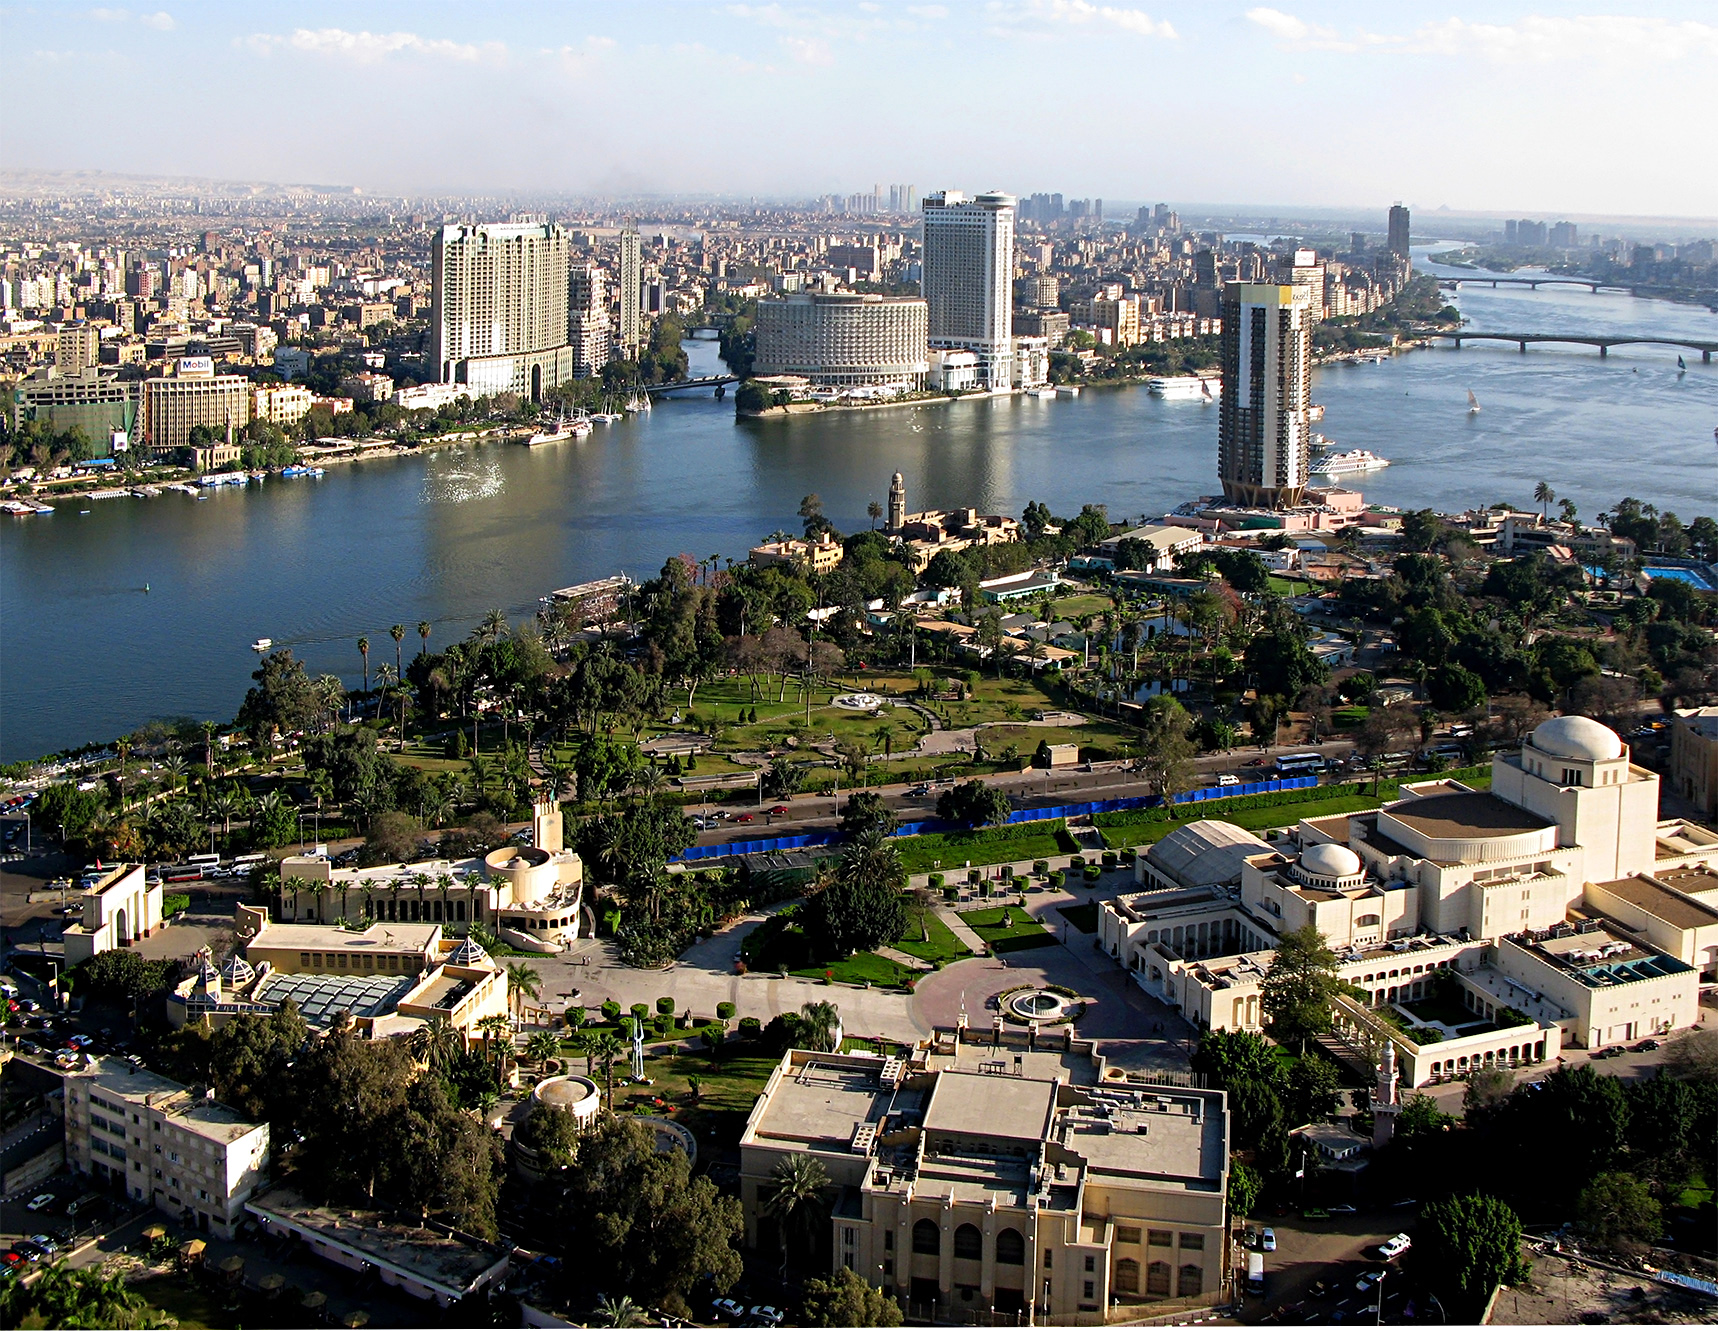 Egypt seeks to get $1.5bn loans before 2016